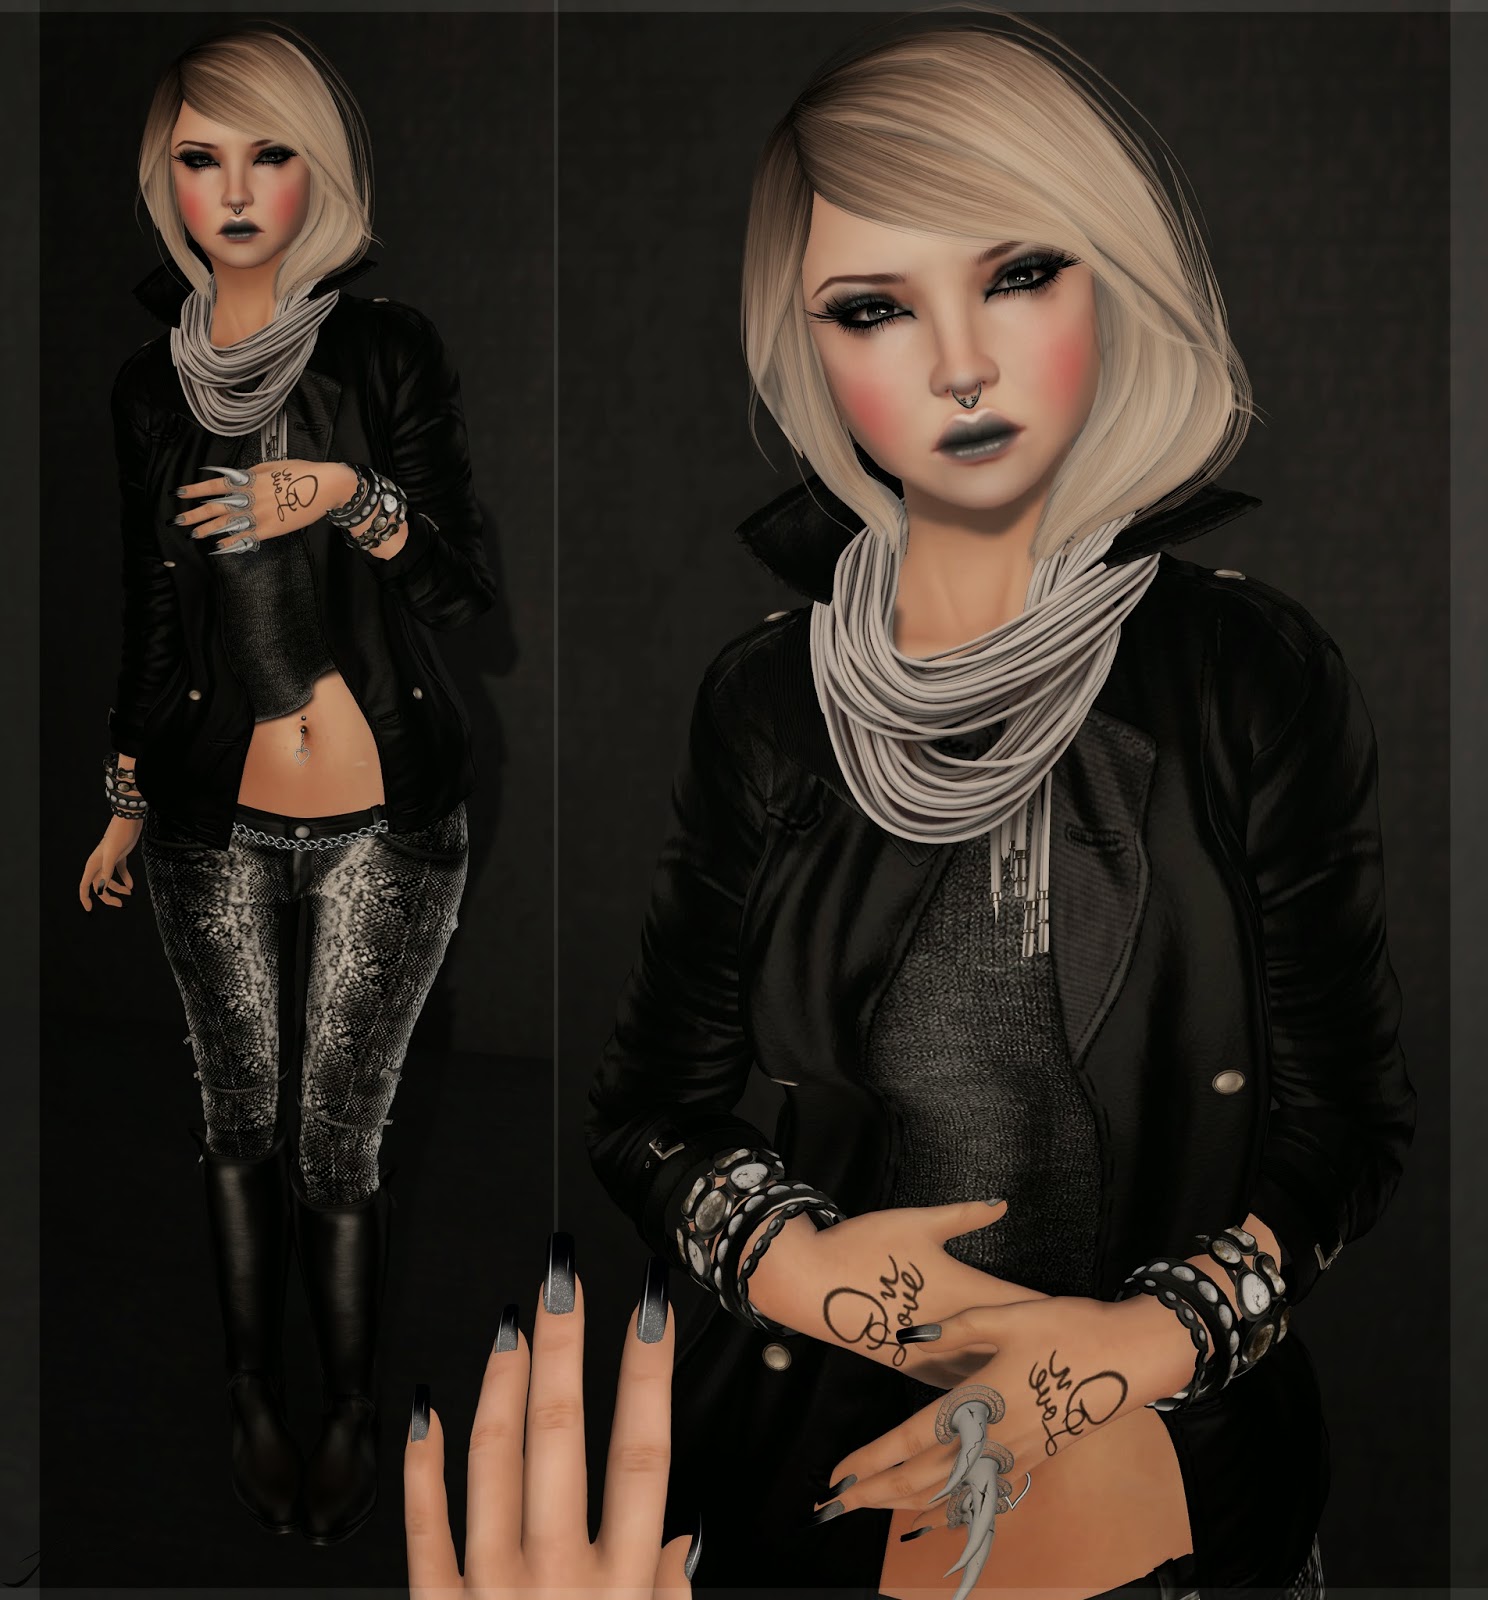 LOTD# 230 - Just addicted to fashion